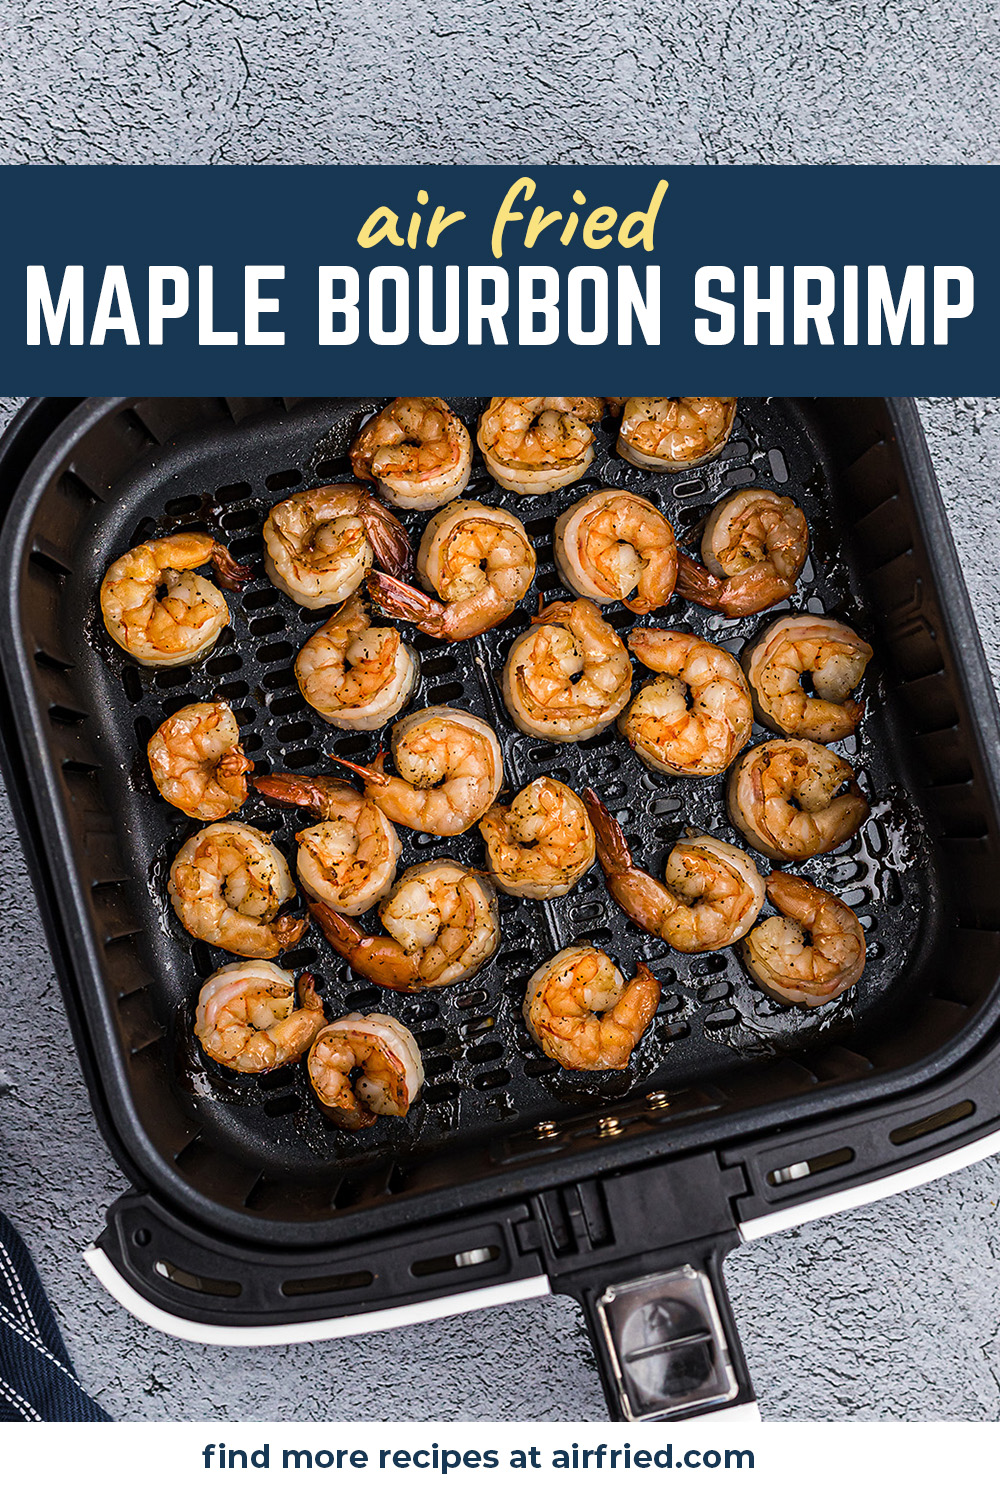 Cooked shrimp spread out in an air fryer basket with a maple bourbon glaze.